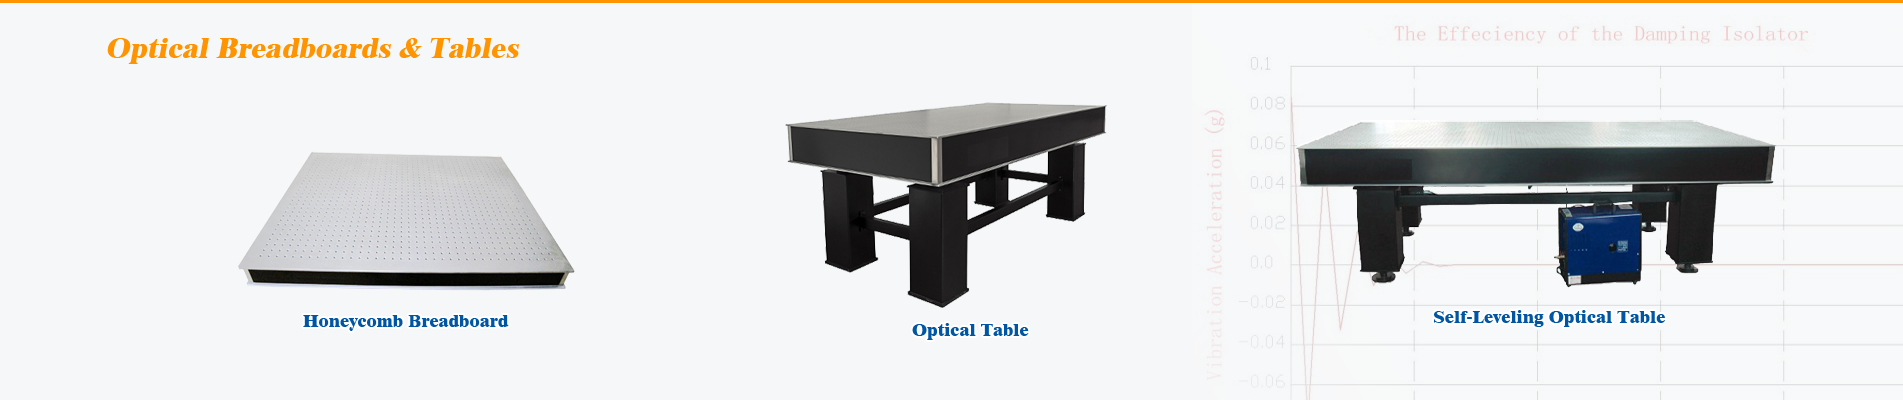 Optical Tables